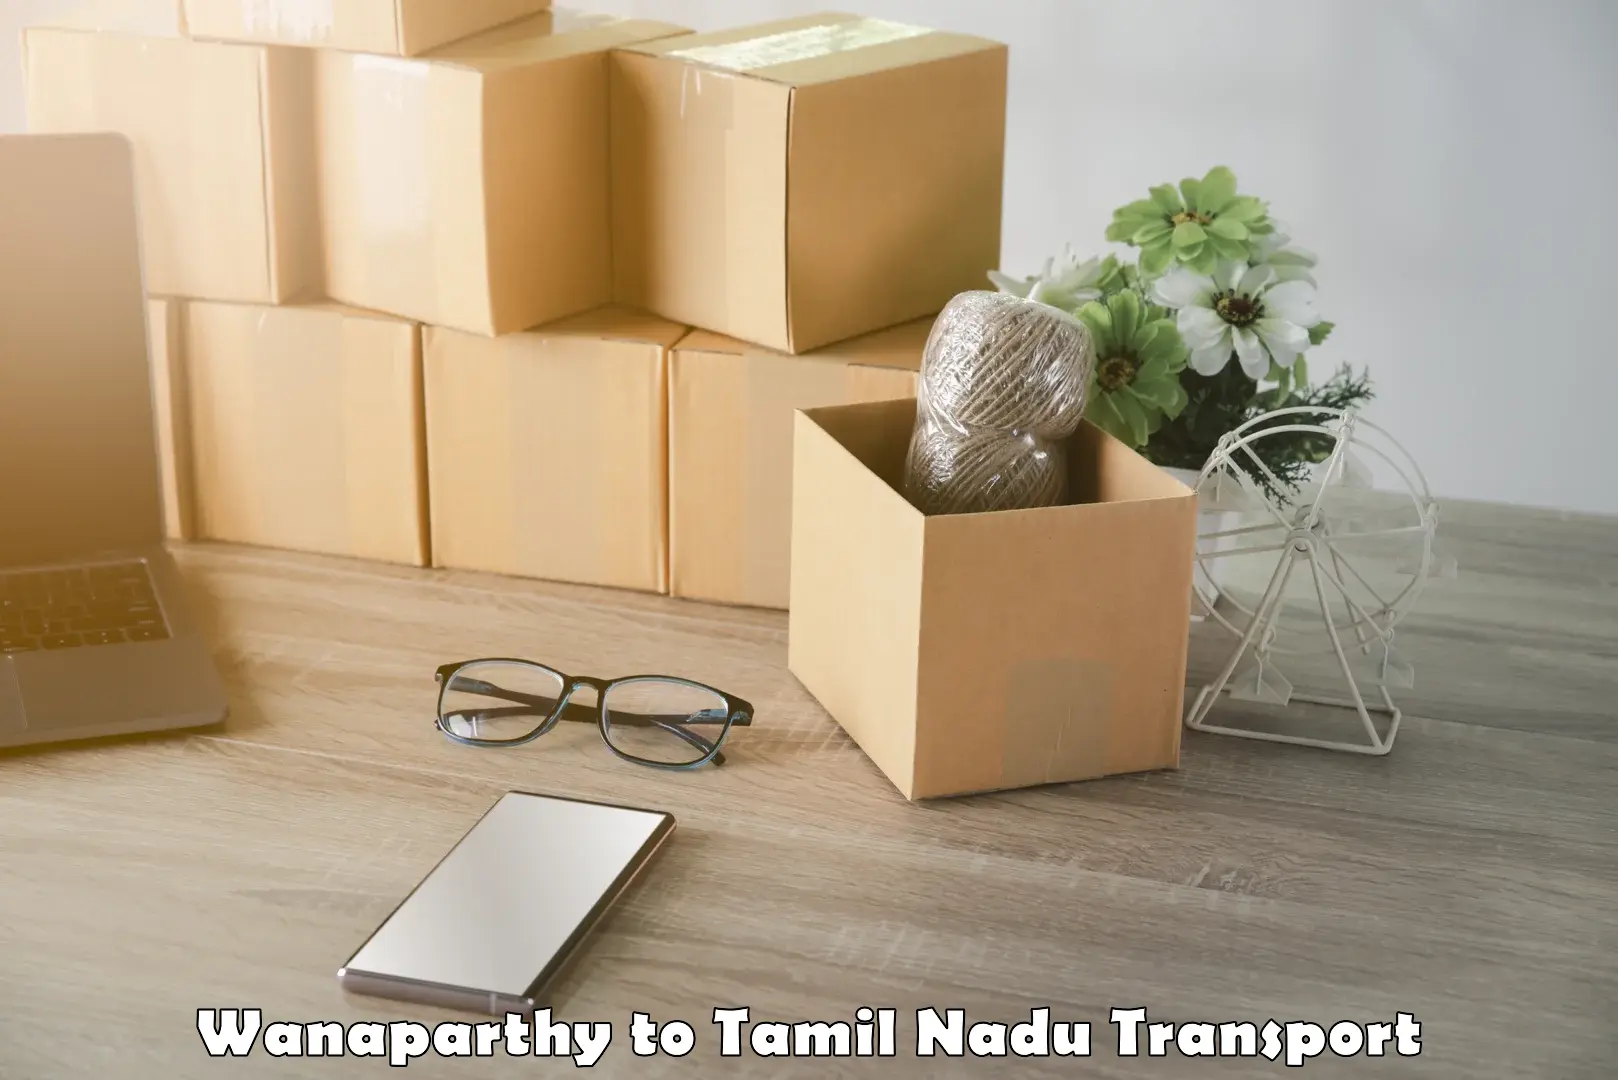 Daily parcel service transport Wanaparthy to Cumbum